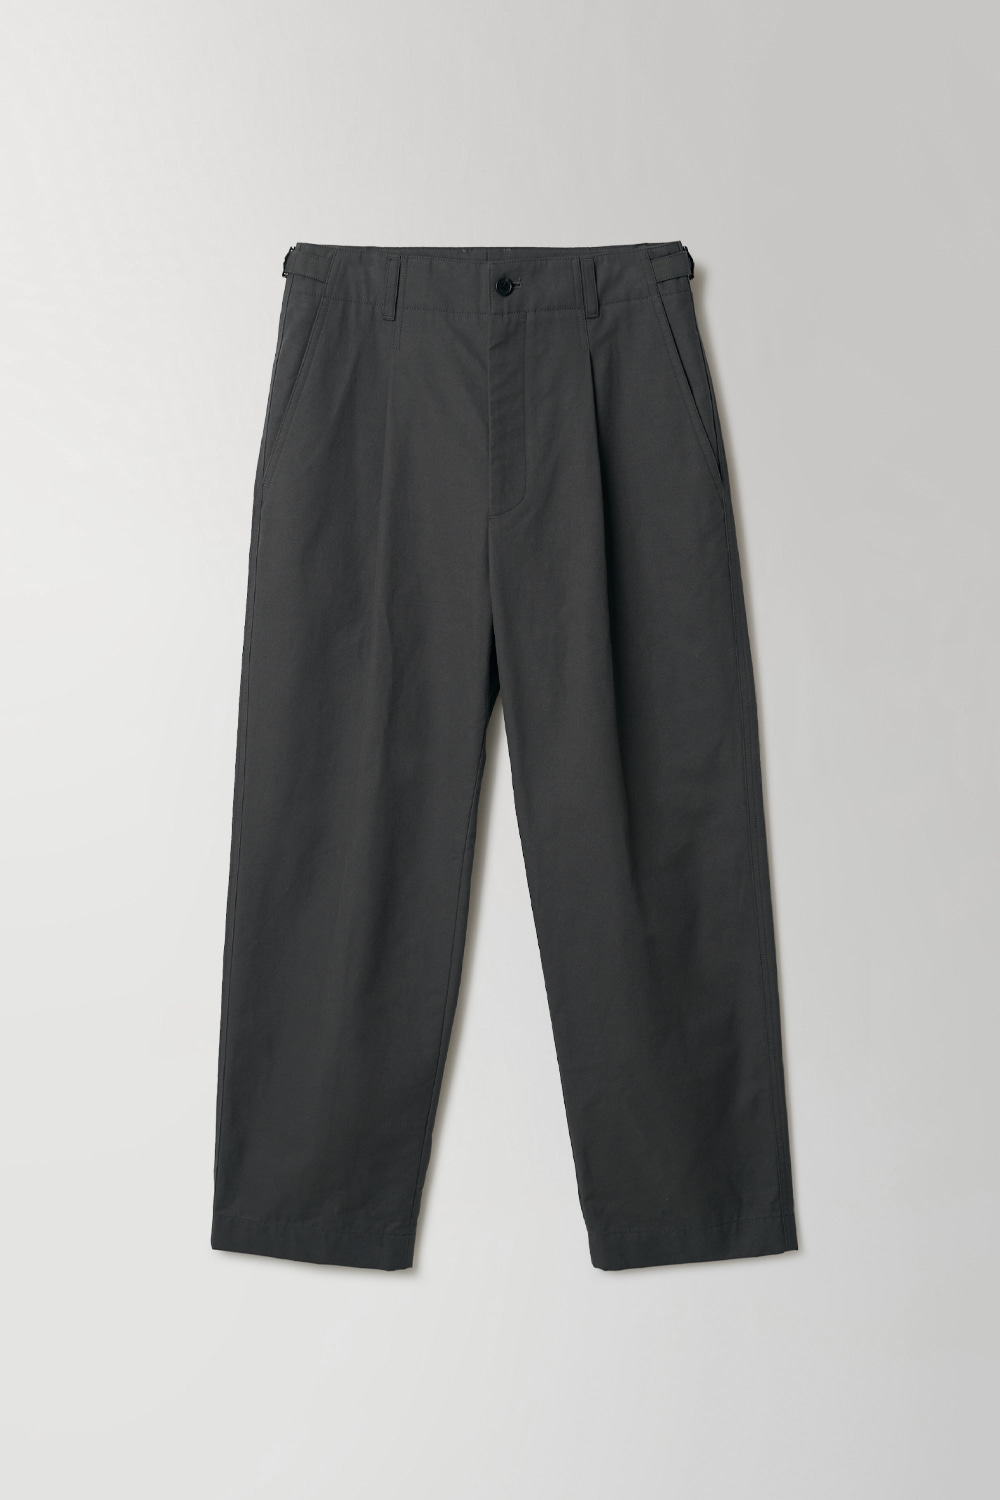 STRUCTURED CHINO PANTS - CHARCOAL